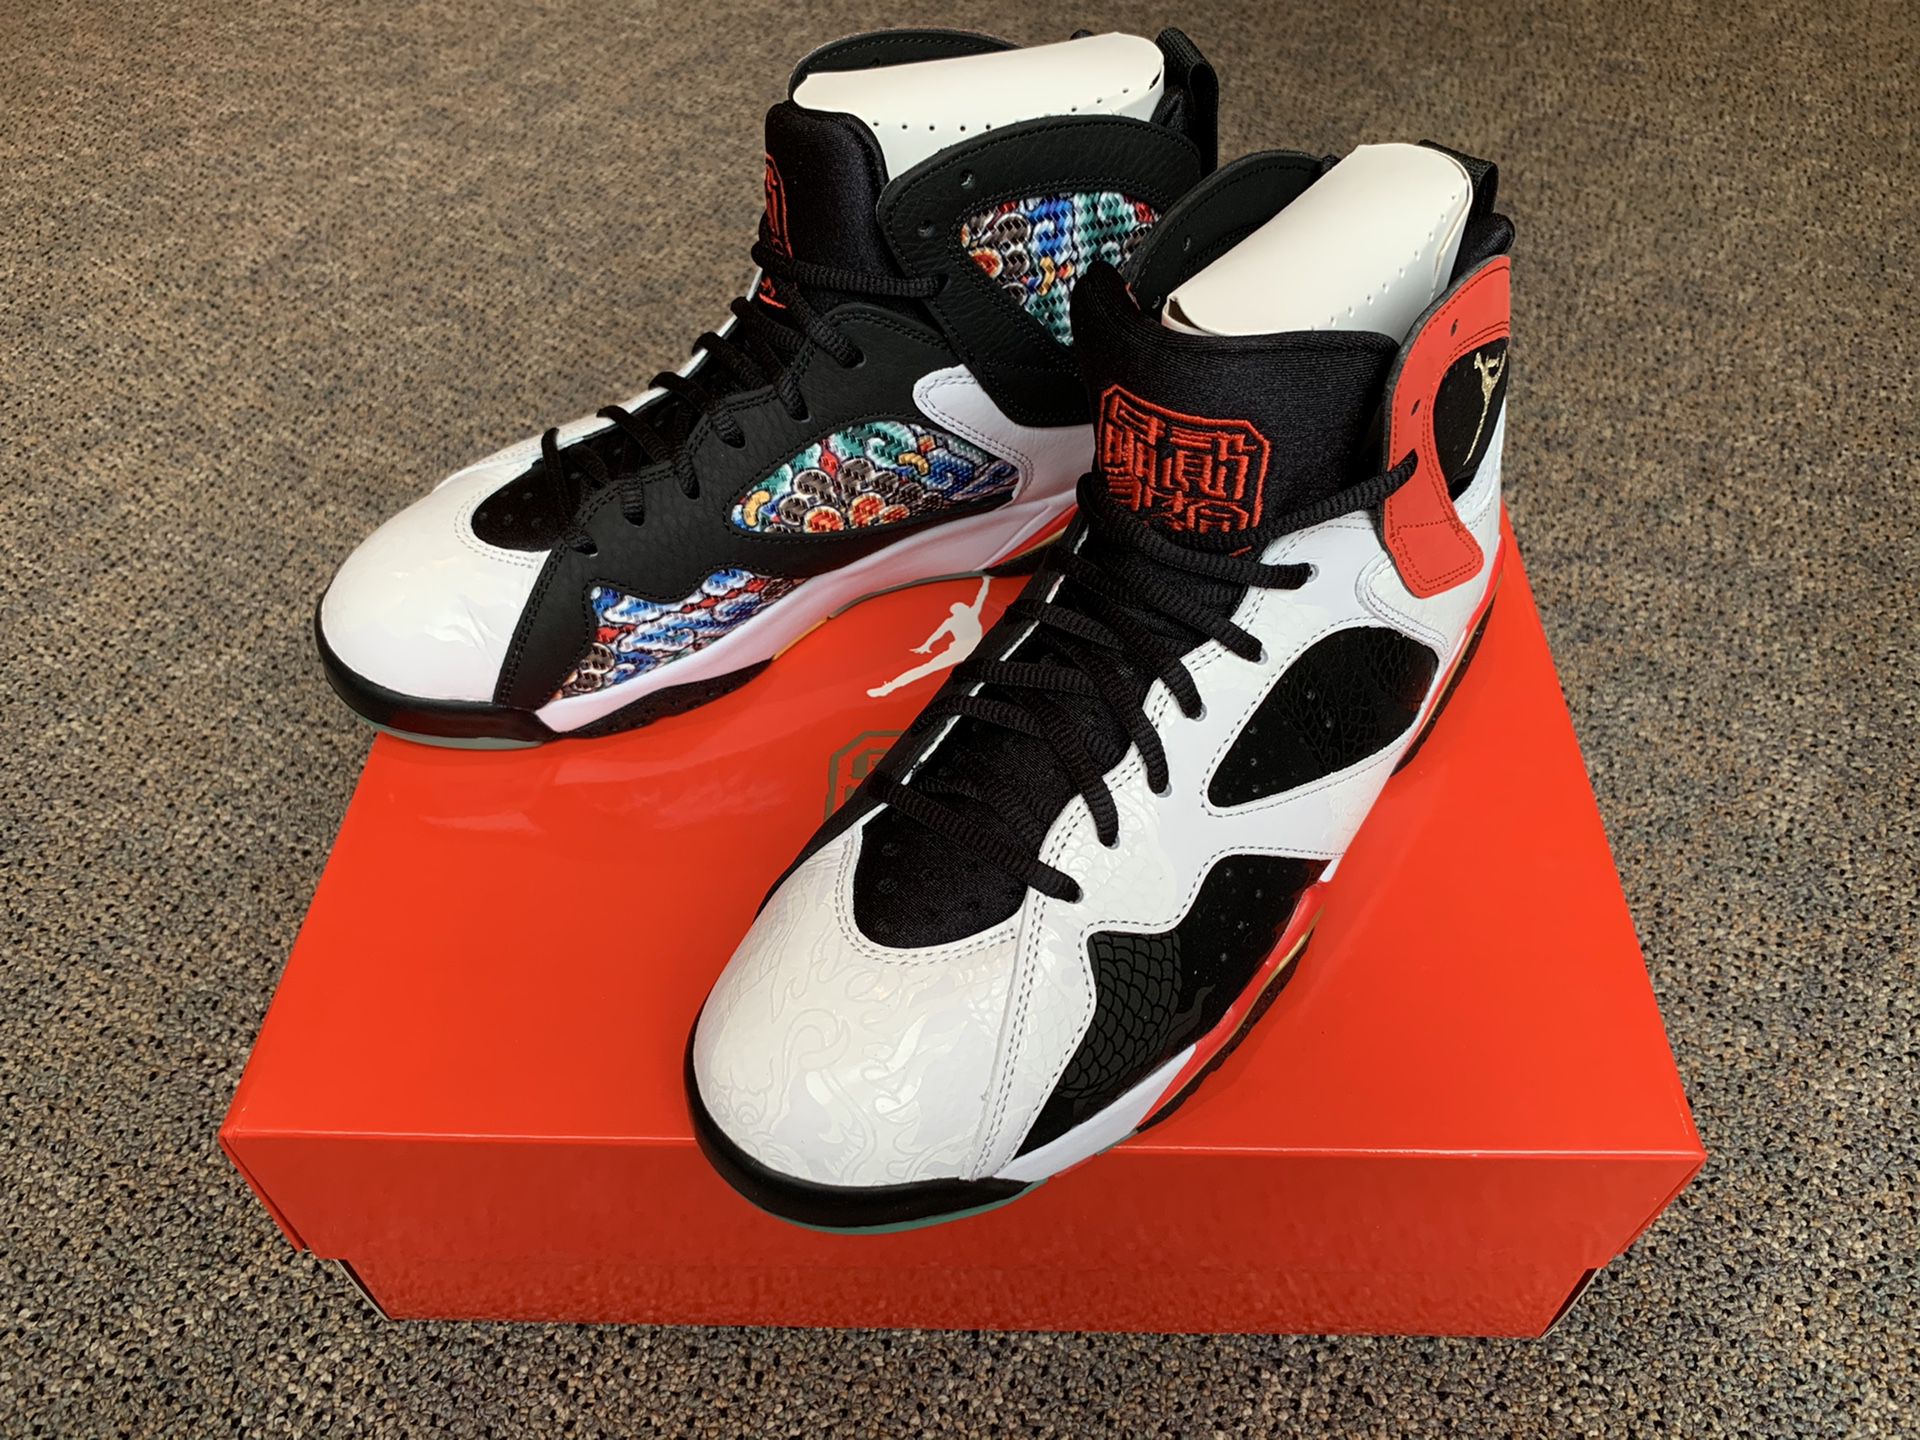 Jordan 7 Retro Greater China Chile Res Size 9.5 and 10.5 (BRAND NEW)